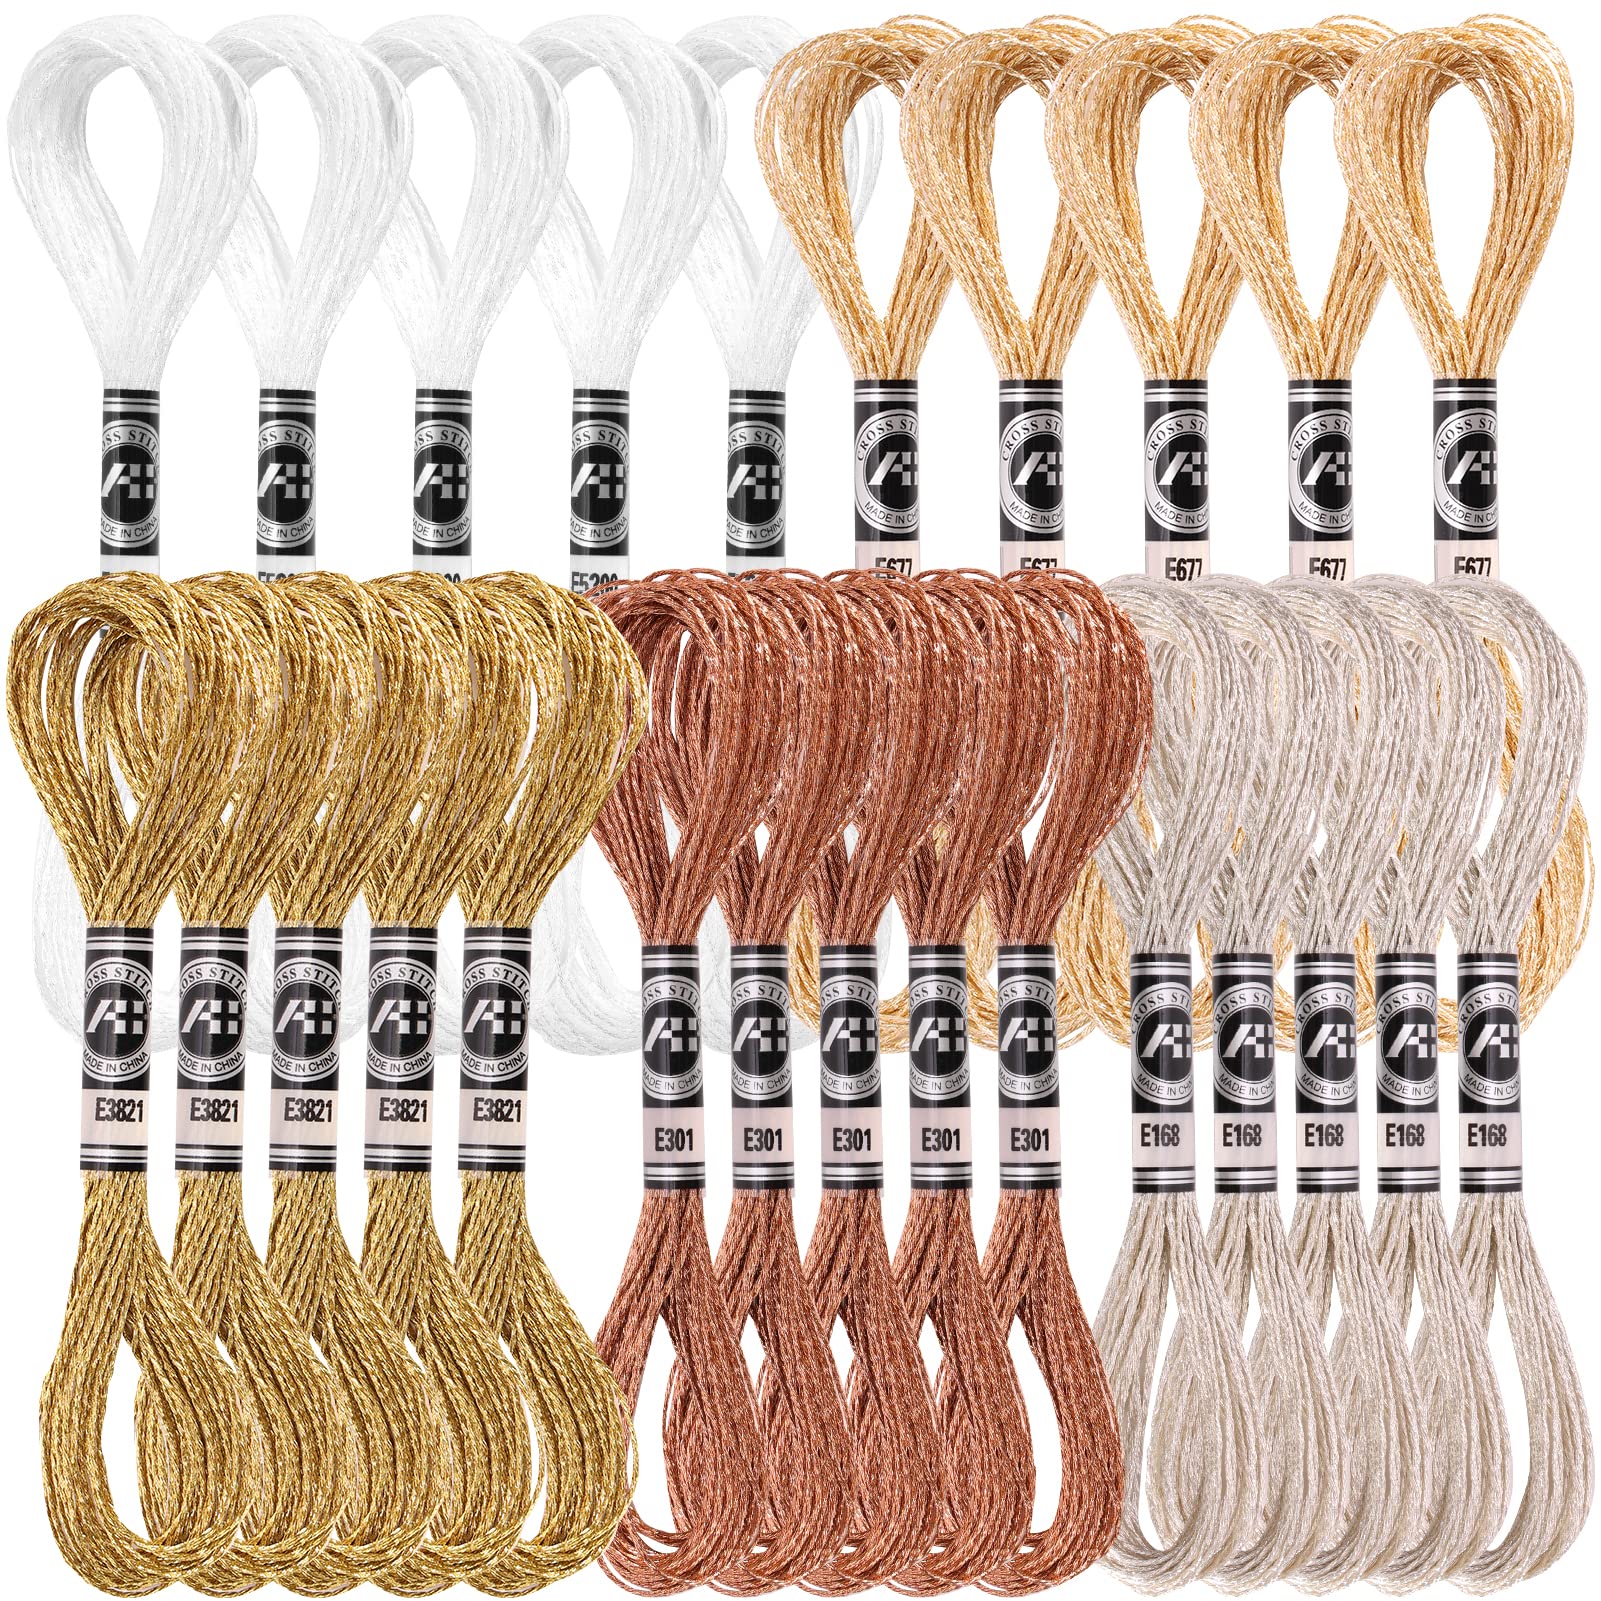 Caydo 25 Skeins 5 Colors Metallic Embroidery Floss